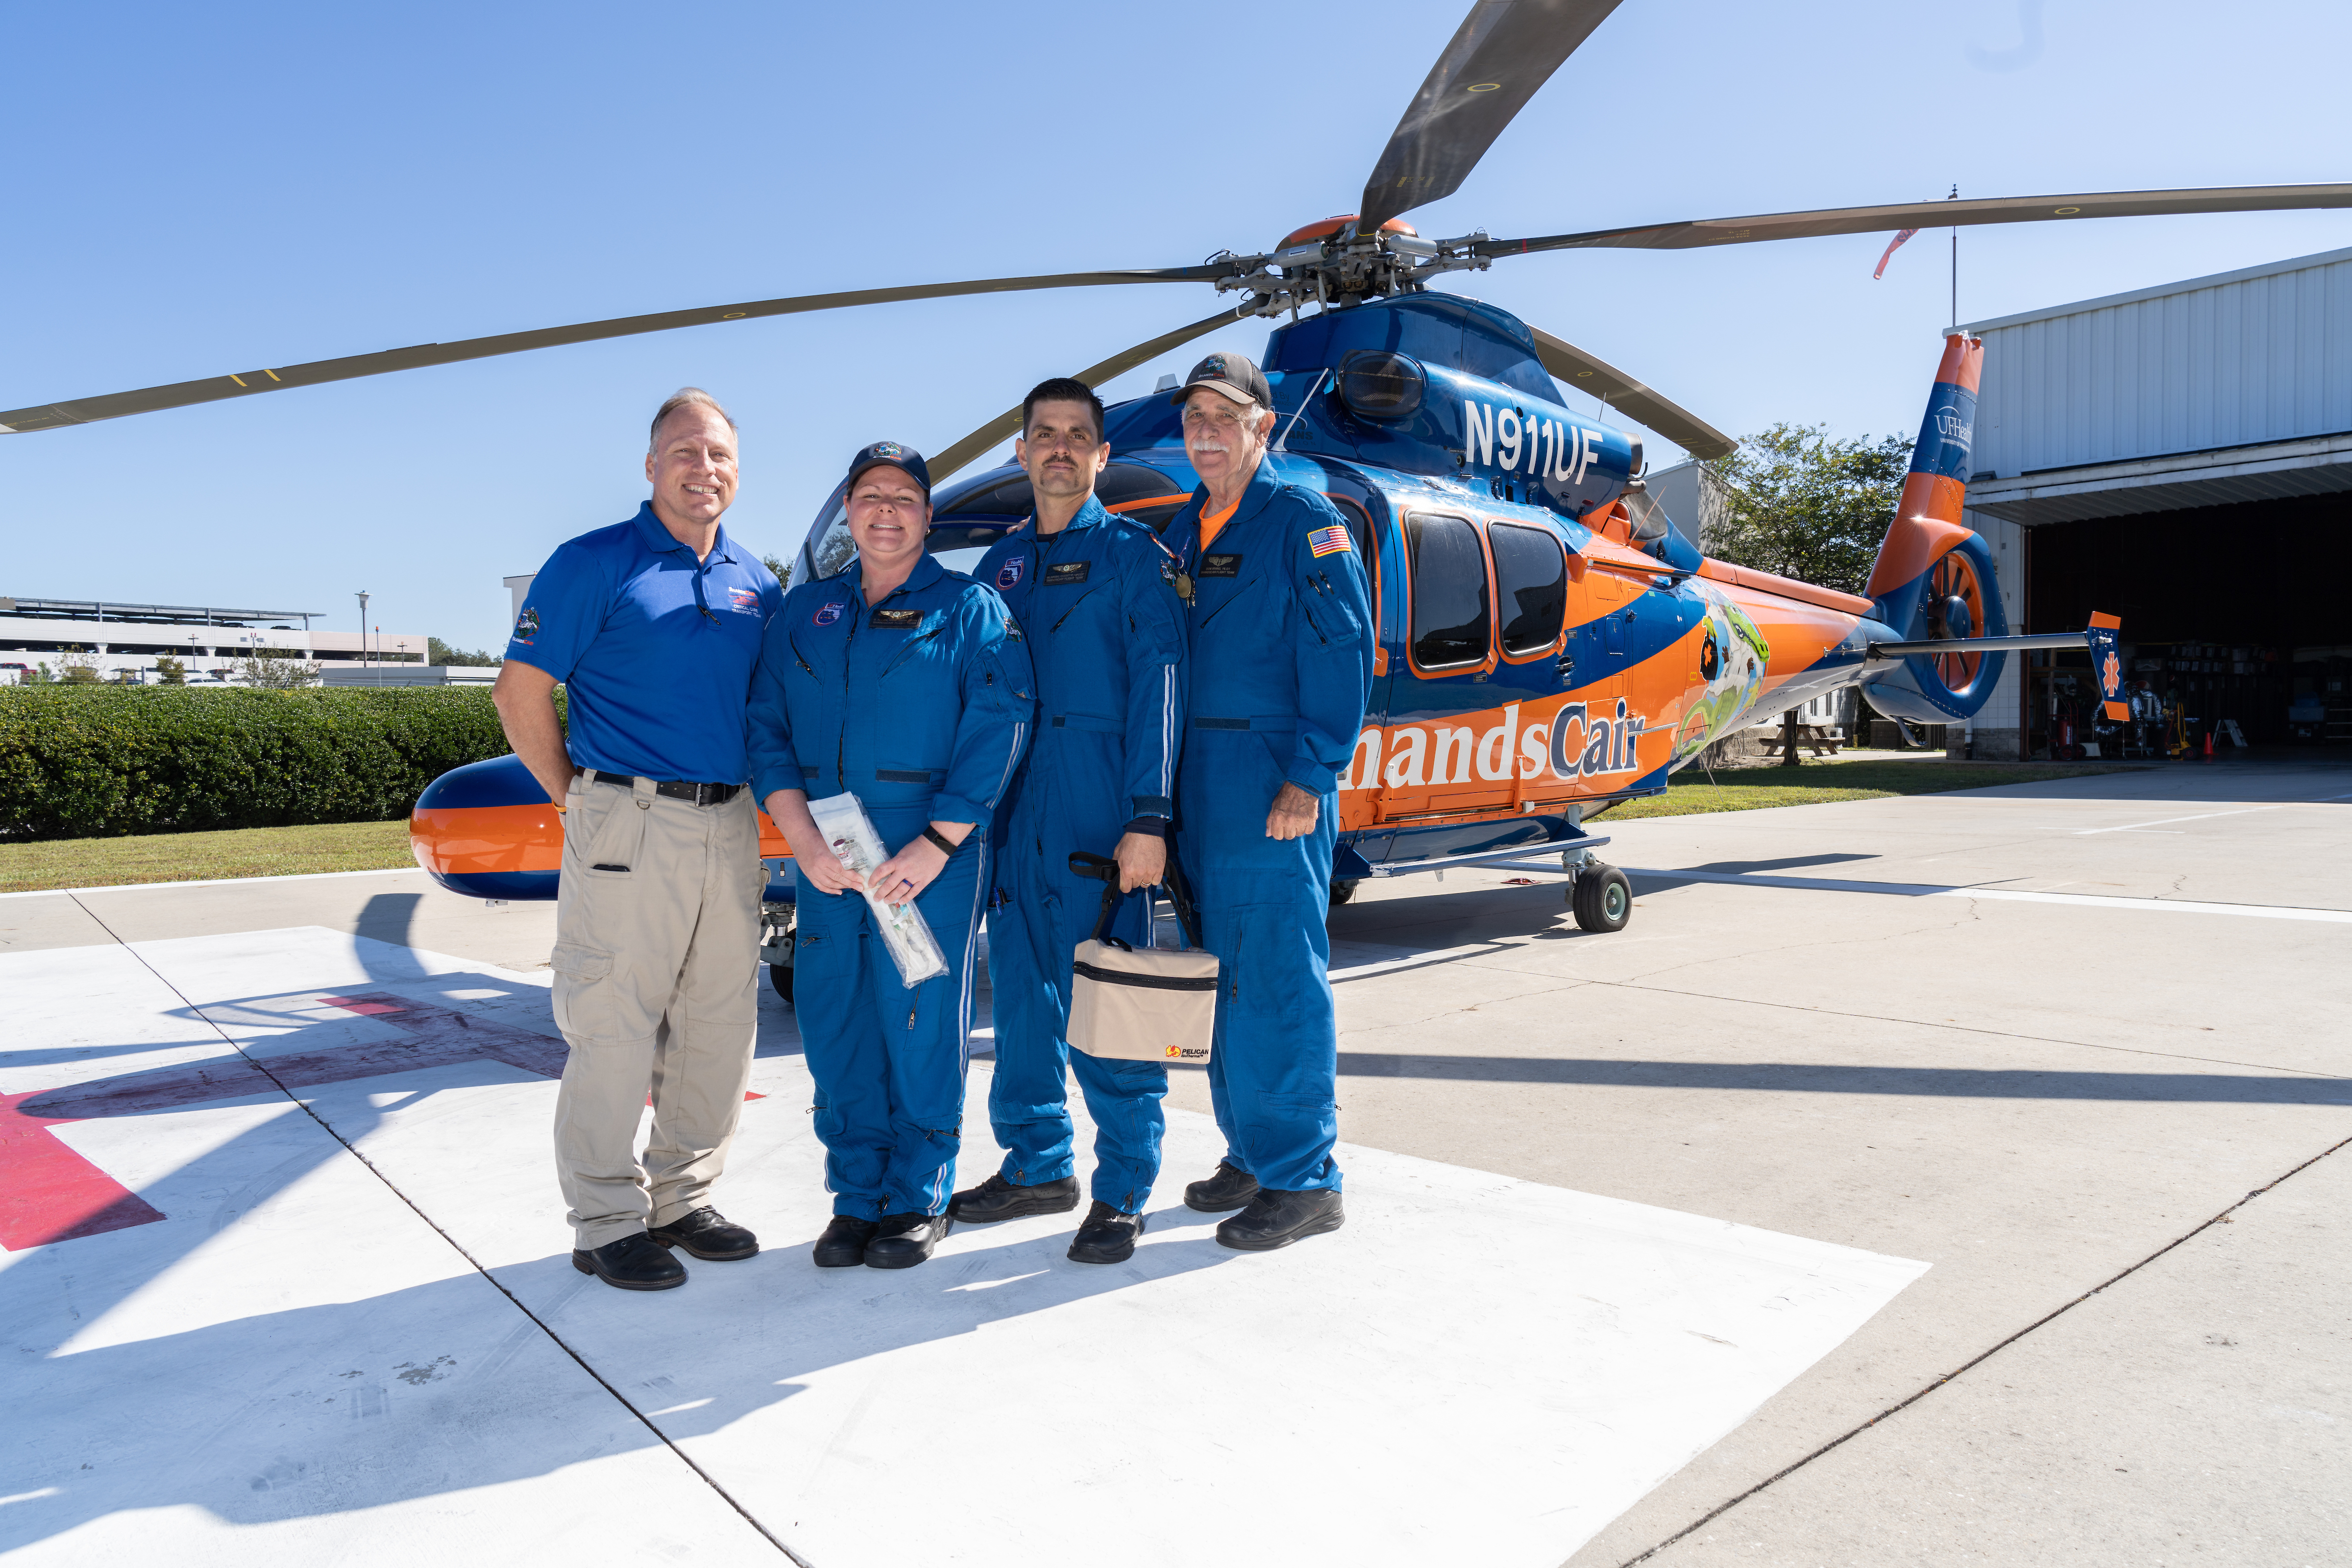 ShandsCair team of four people standing in front of a ShandsCair helicopter